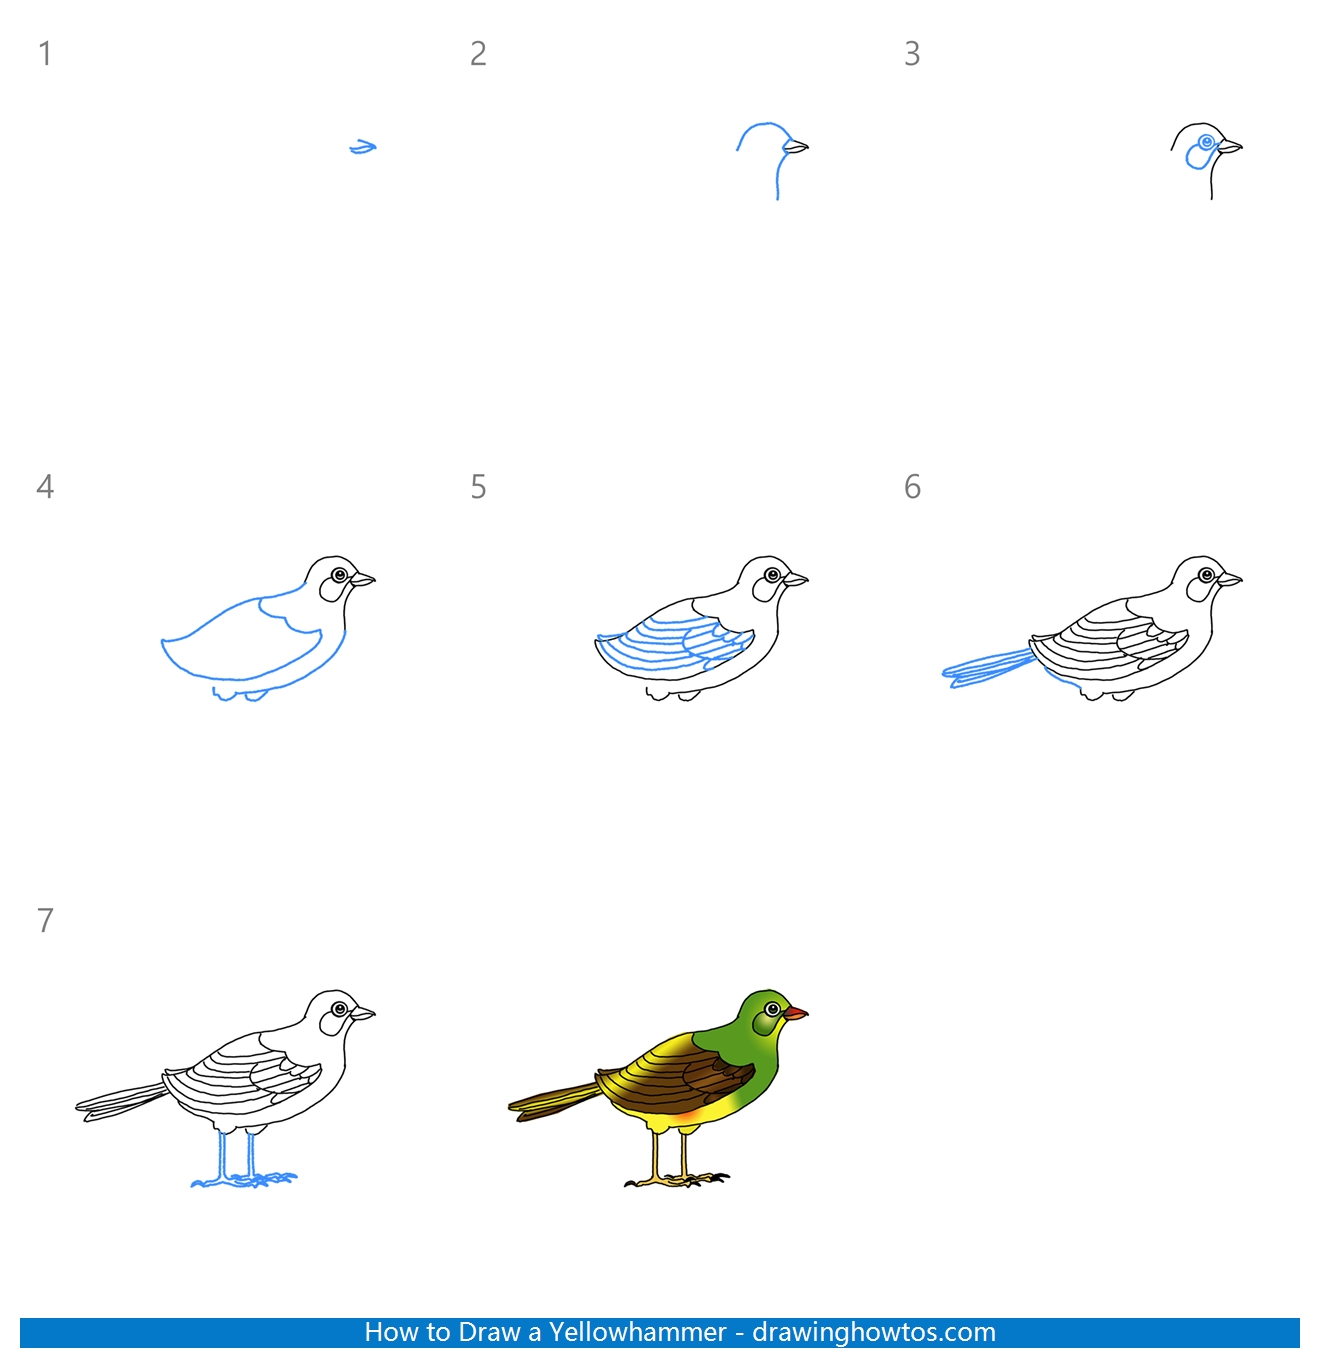 How to Draw a Yellowhammer Step by Step